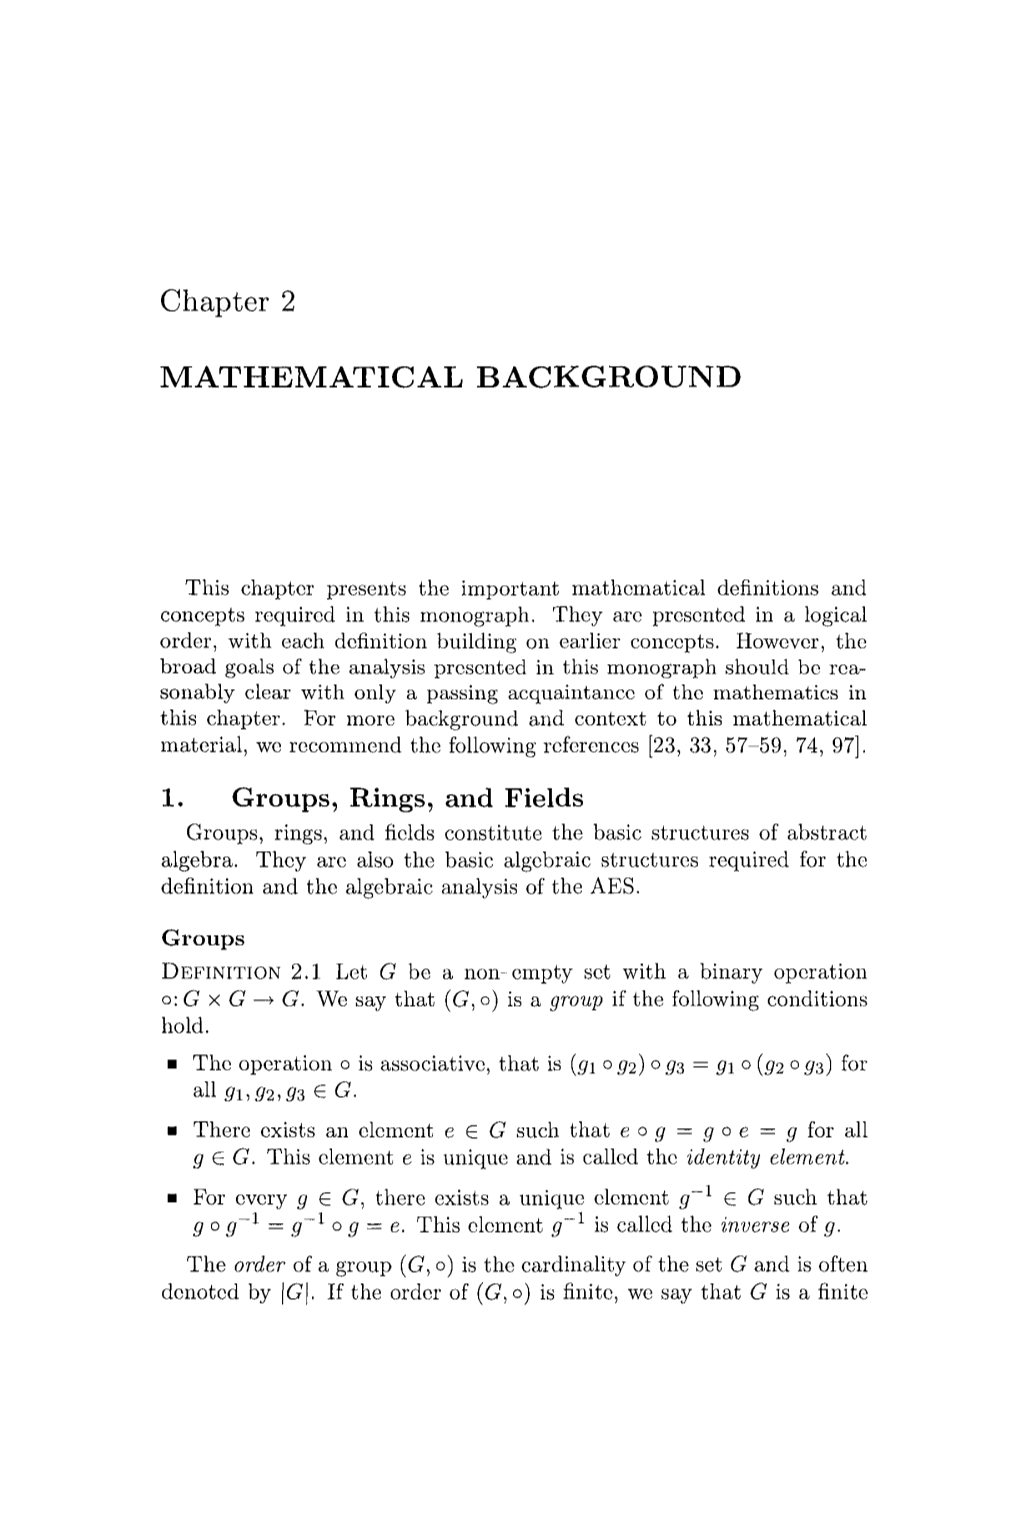 Chapter 2 MATHEMATICAL BACKGROUND 1. Groups, Rings